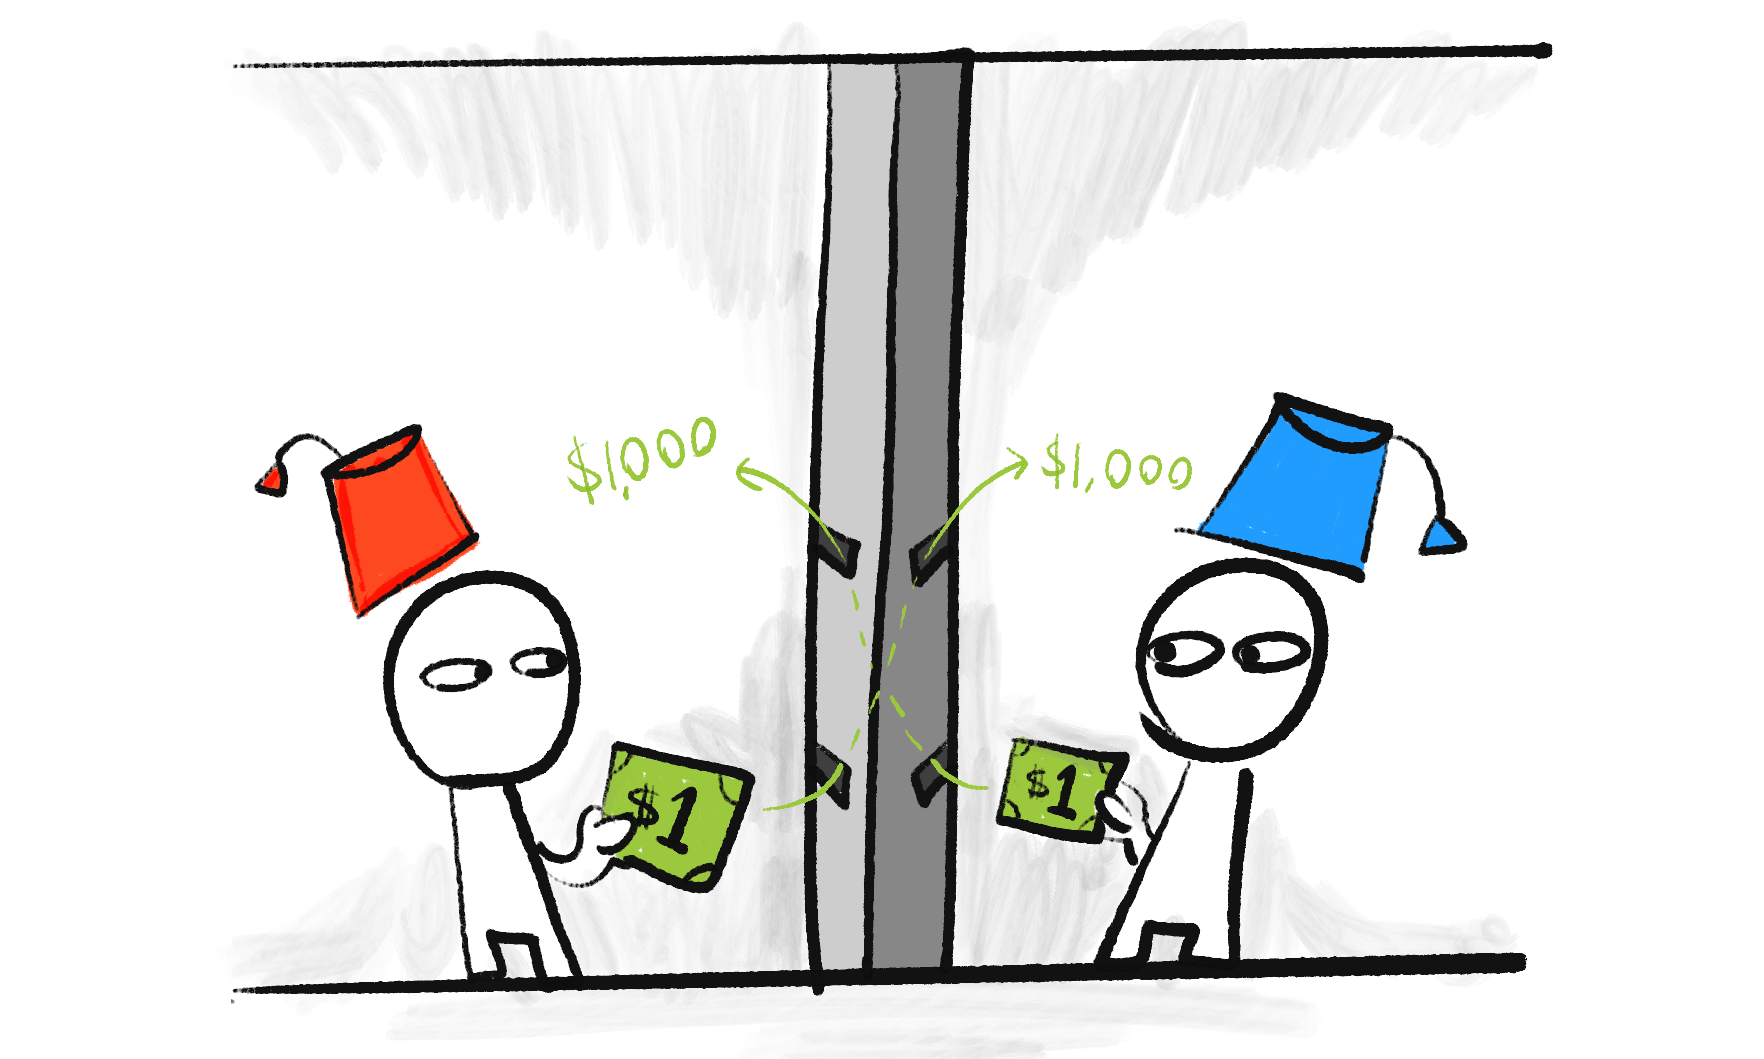 A cartoon drawing visualizing the game: put $1 in, the other player gets $1000, and vice versa.